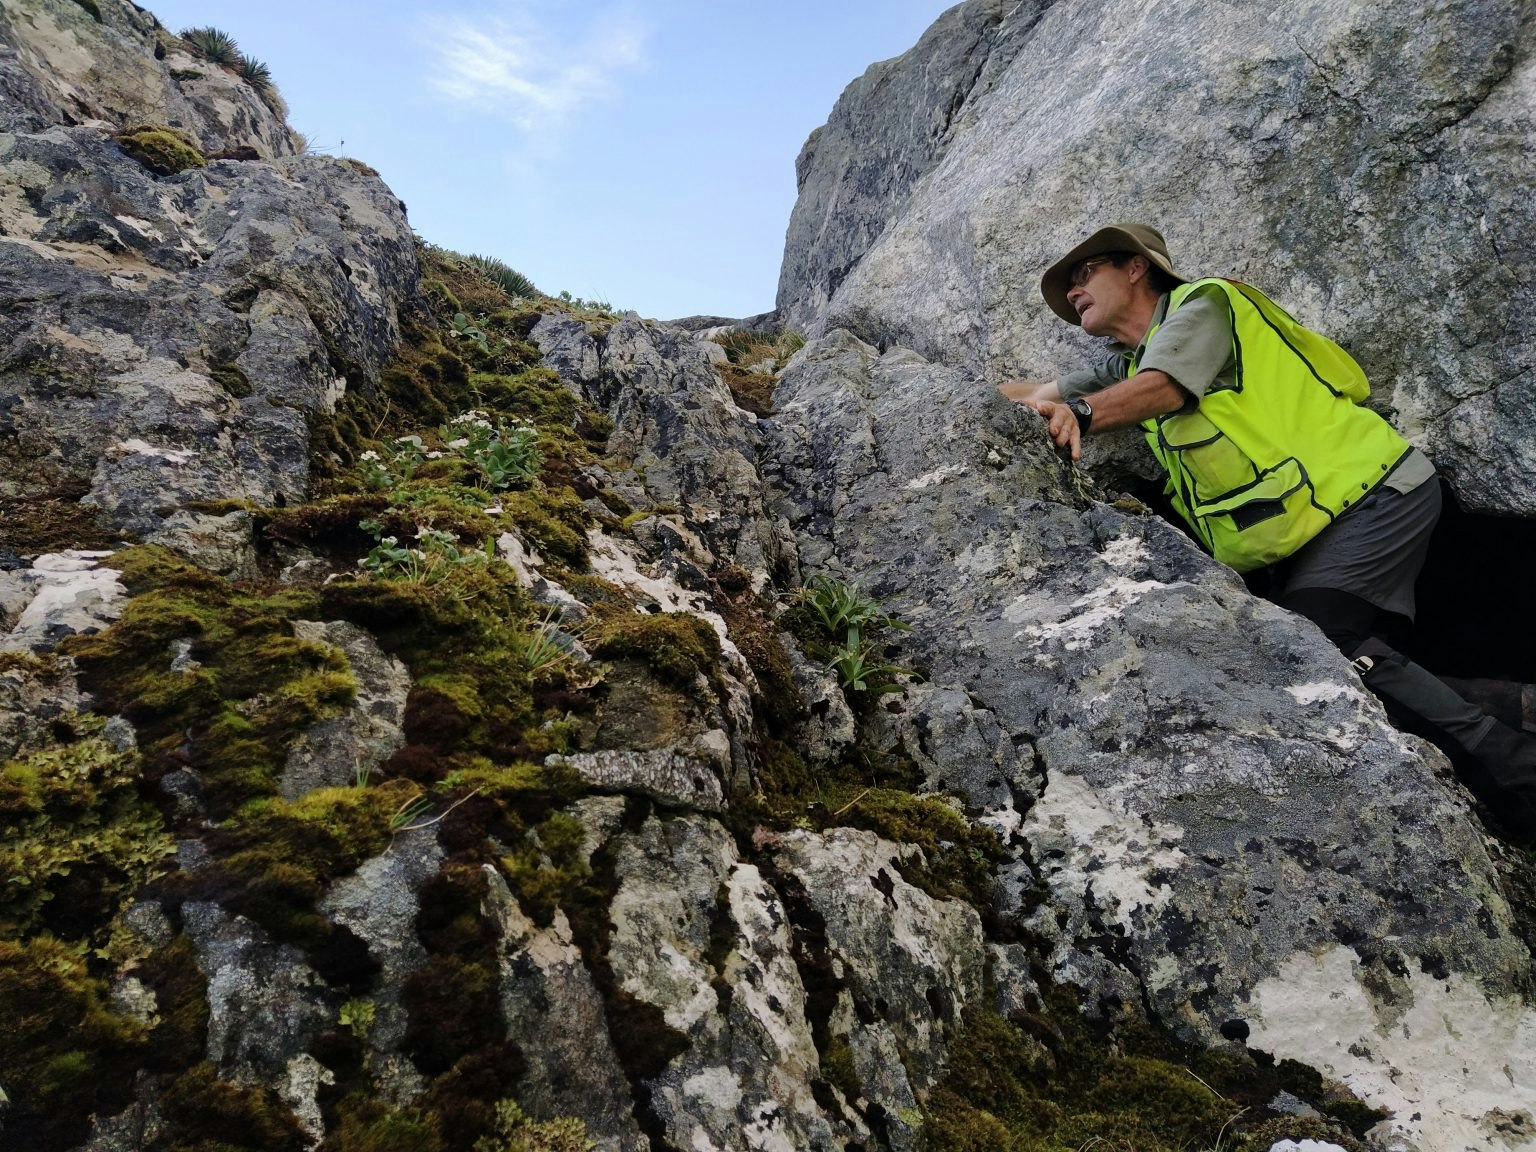 A man in high-vis gear leaning on a mountain rock